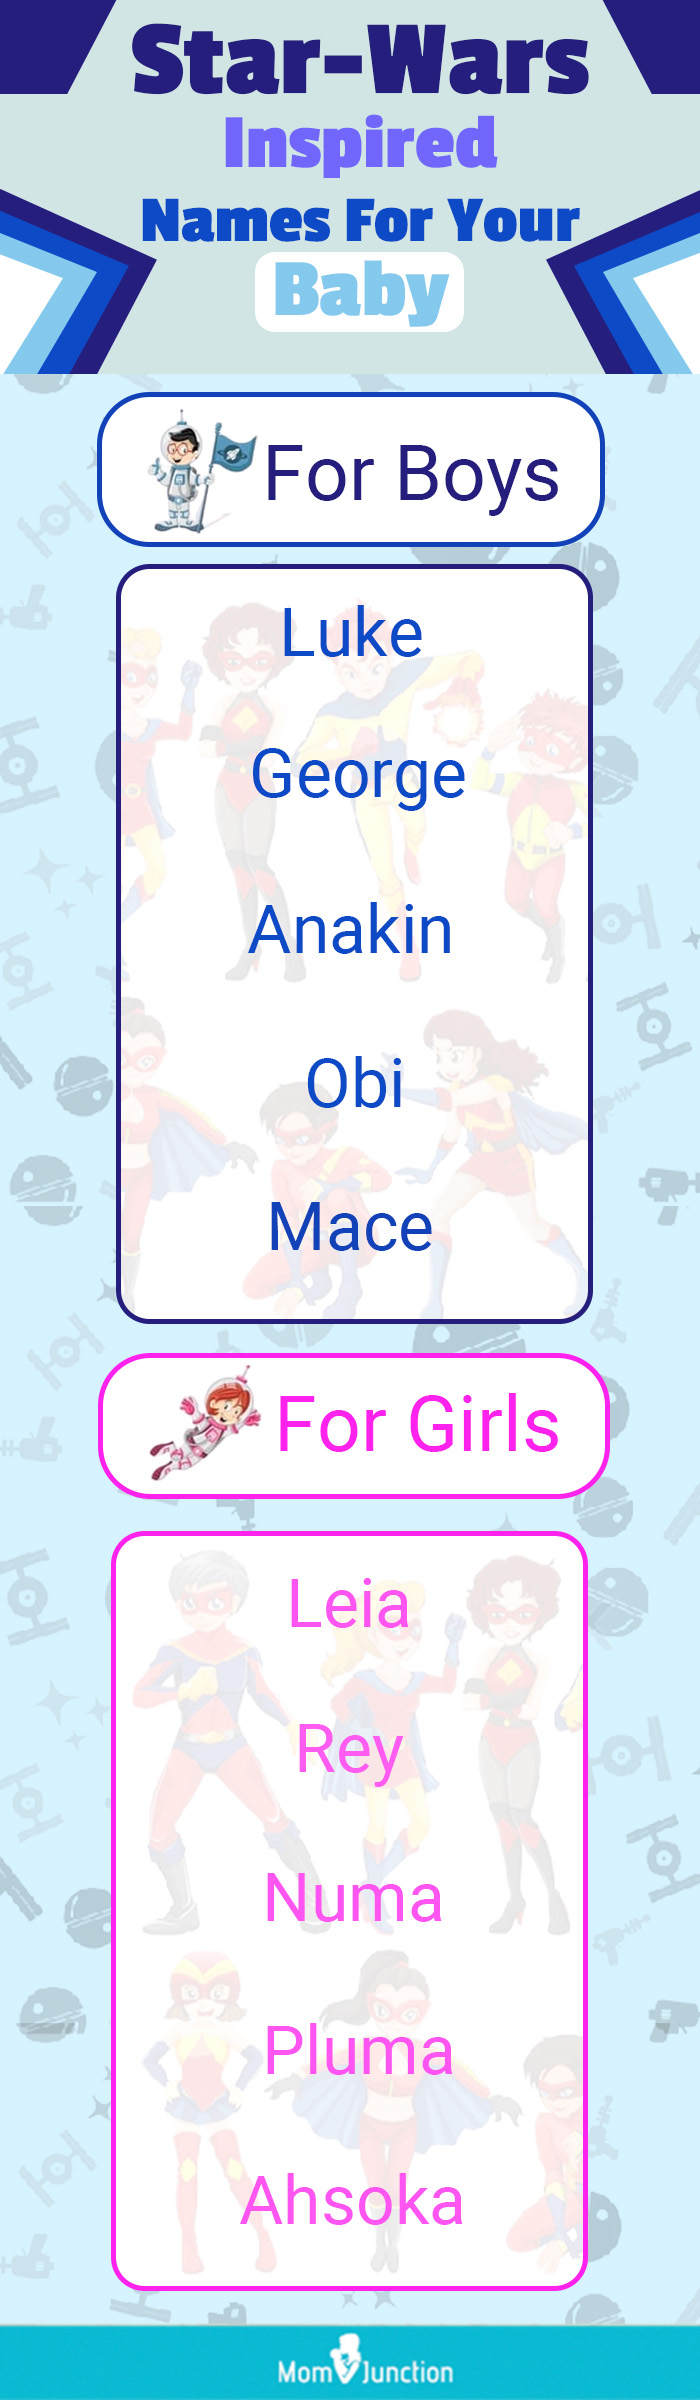 star-wars inspired names for your baby (infographic)